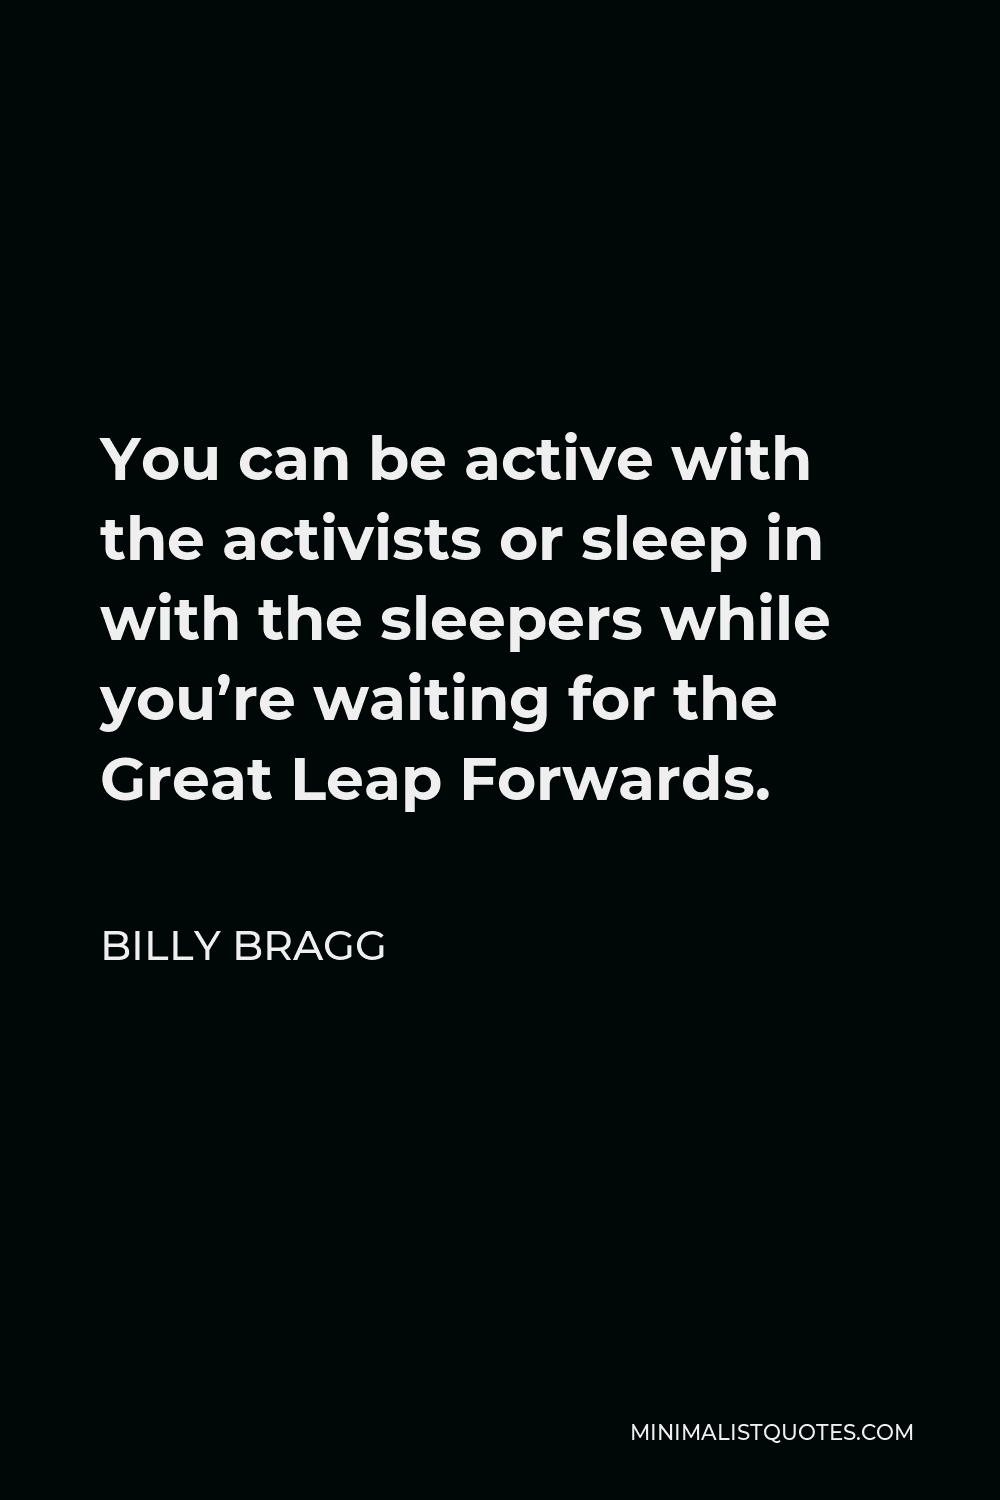 Billy Bragg Quote - You can be active with the activists or sleep in with the sleepers while you’re waiting for the Great Leap Forwards.